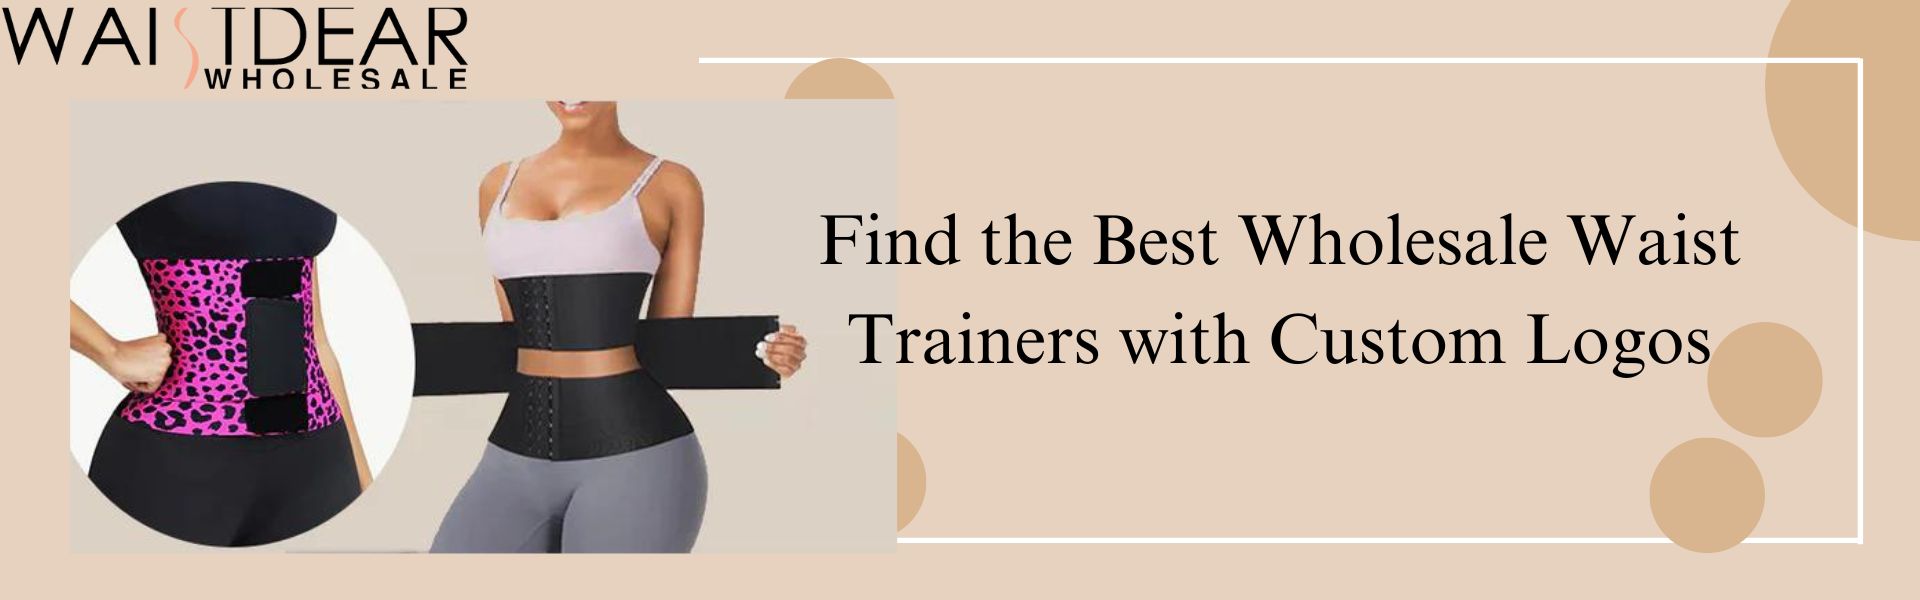 Find the Best Wholesale Waist Trainers with Custom Logos